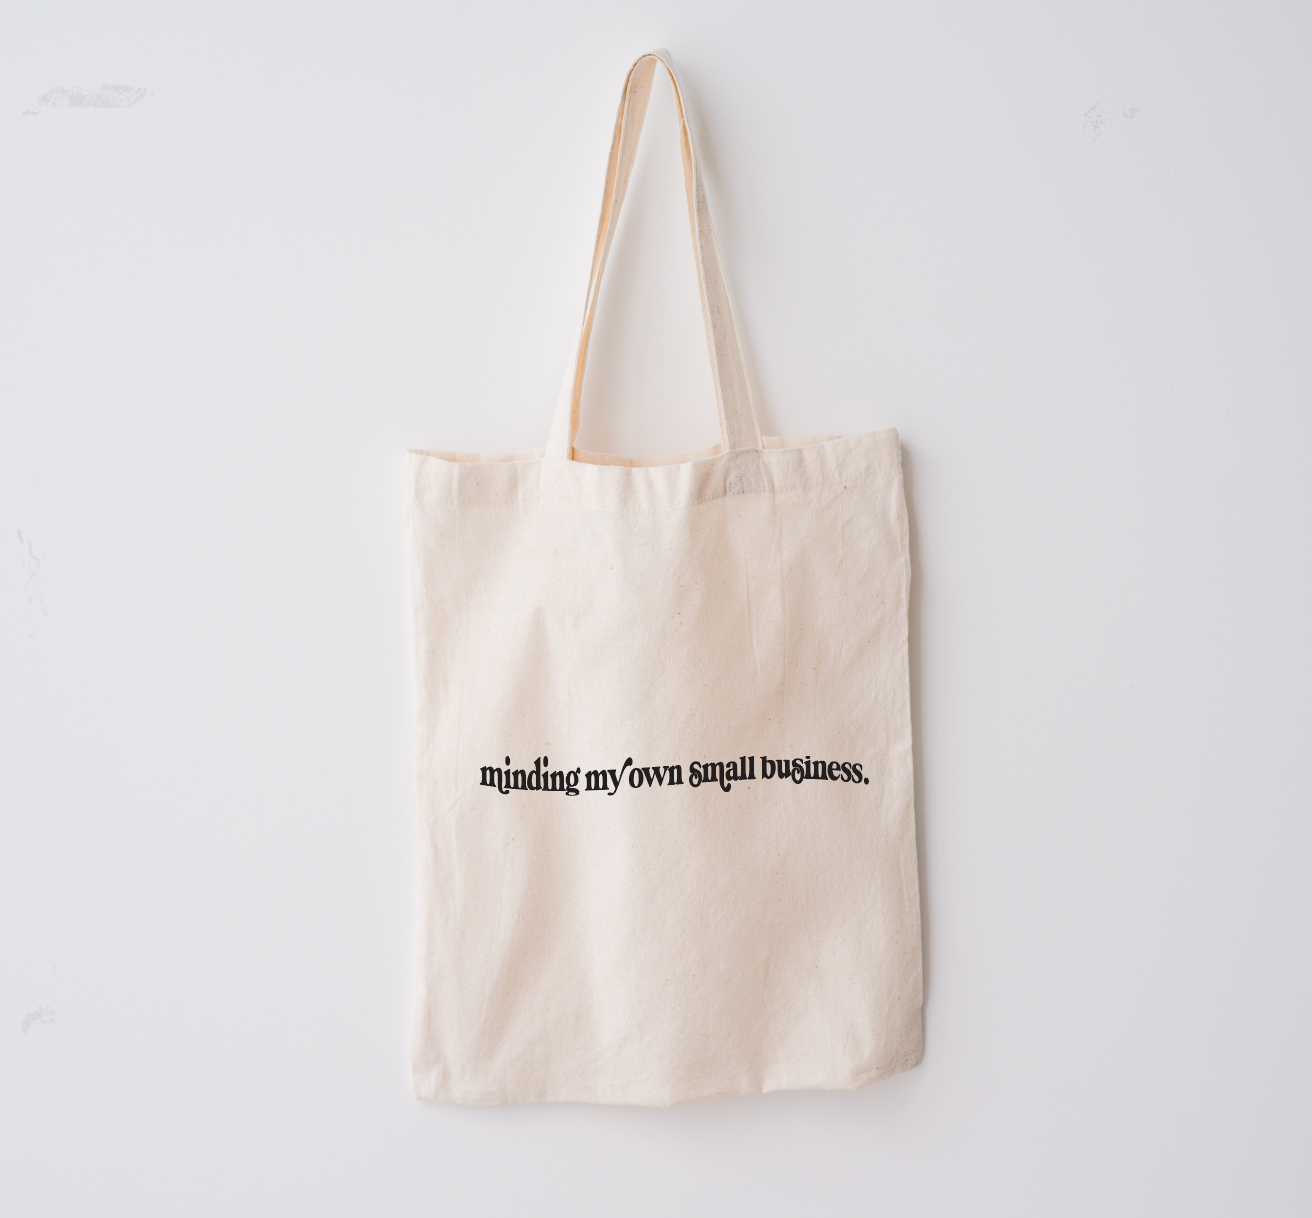 Minding My Own Small Business  - Market Tote Bag